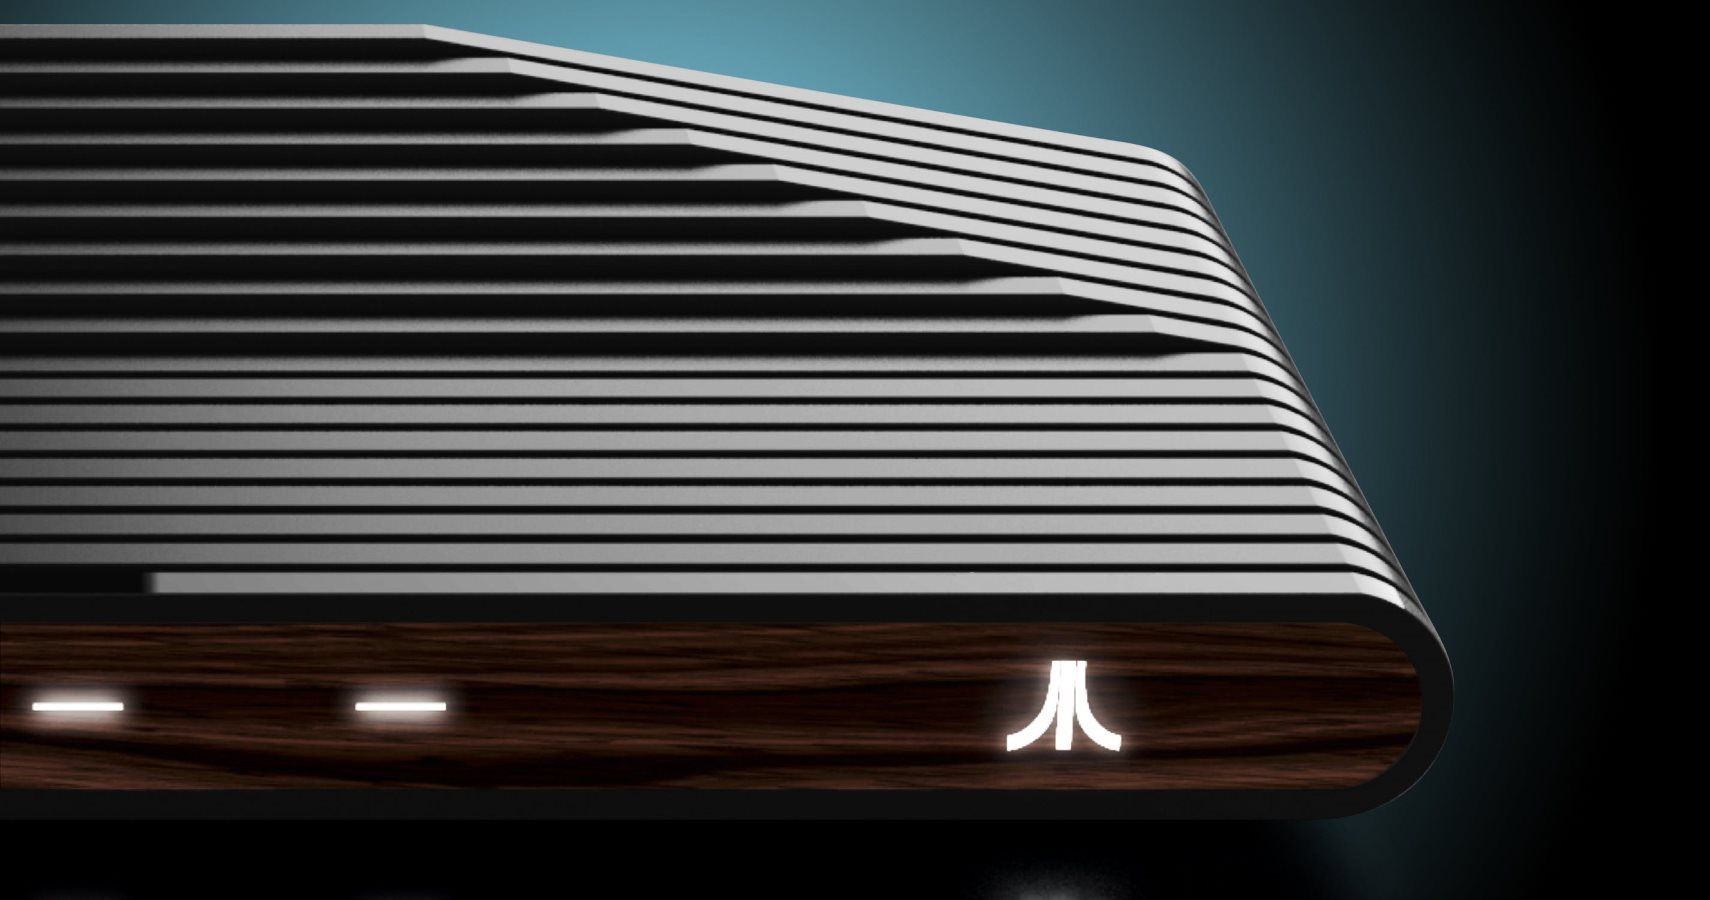 Atari's New Console Has Raised More Than $2 Million In Pre-Orders On Its First Day